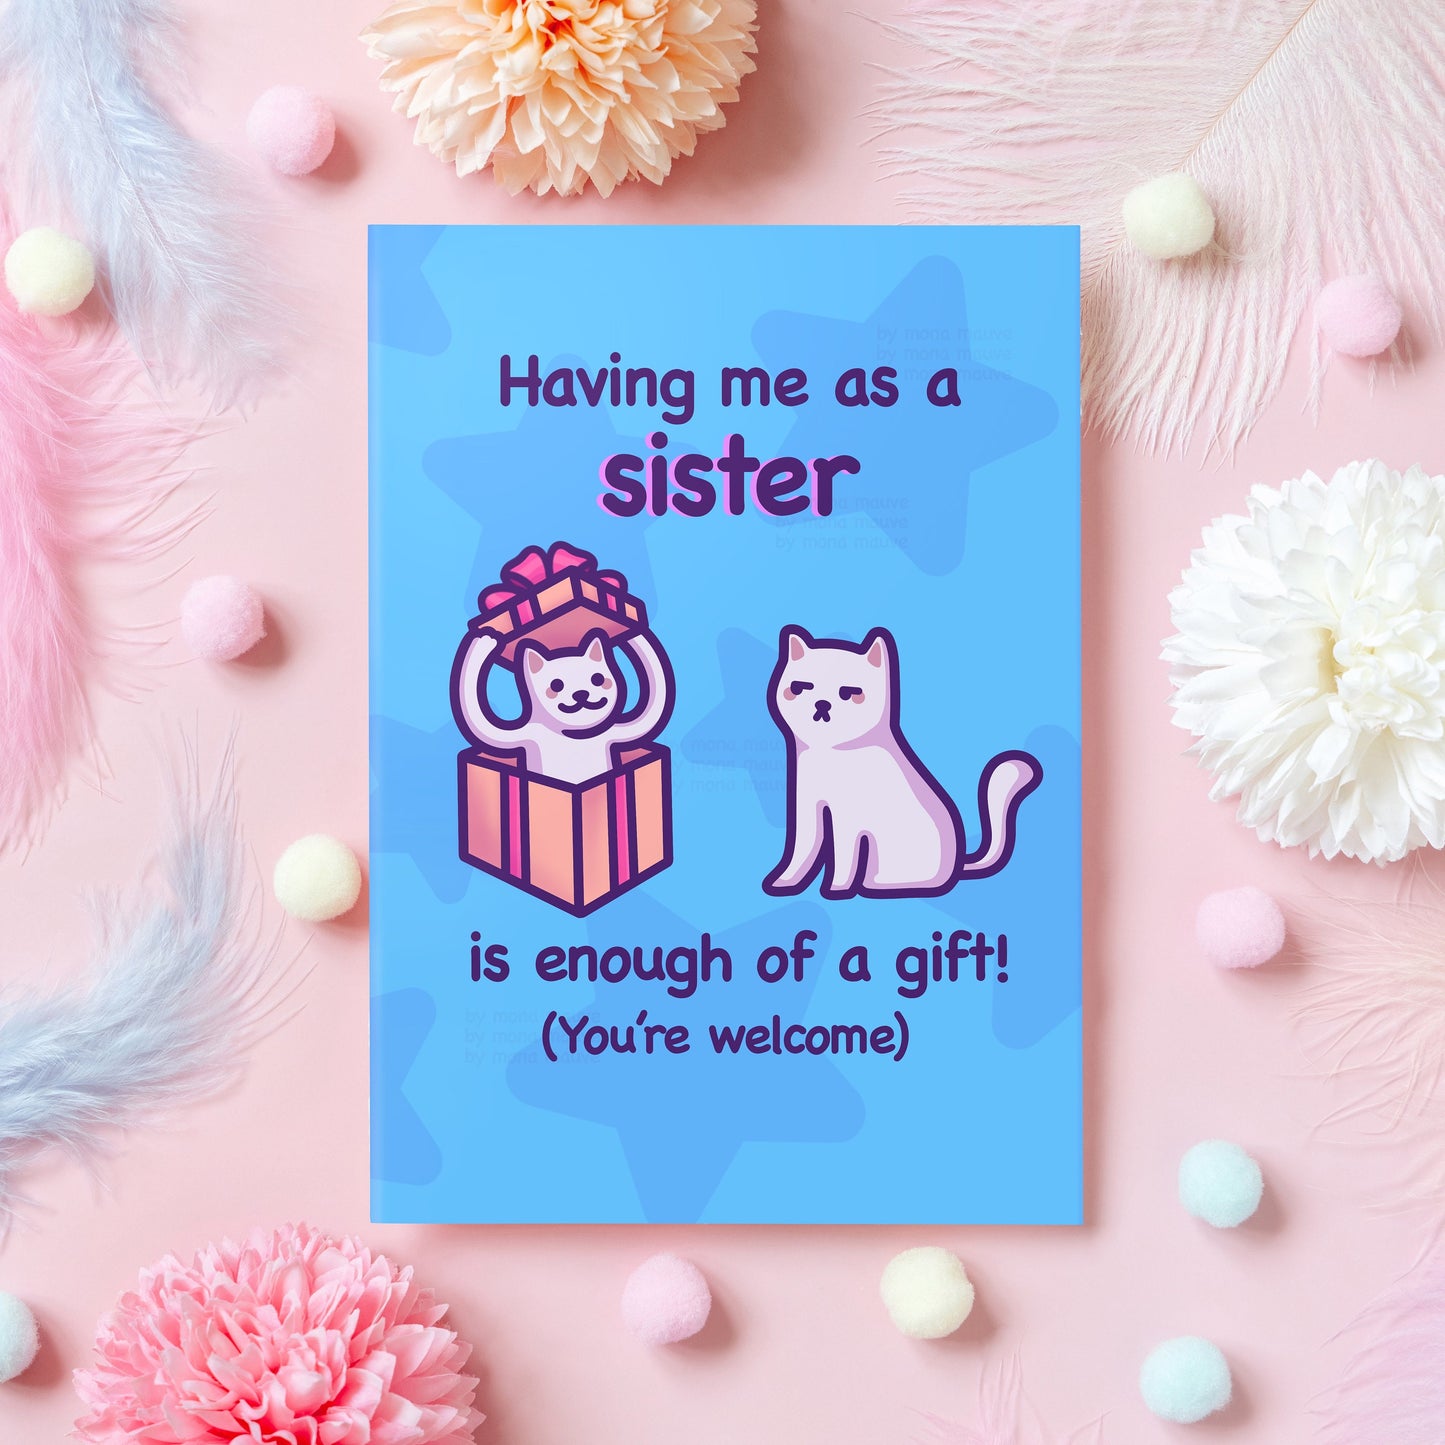 Funny Sibling Birthday Card | Having Me as a Sister Is Enough of a Gift!